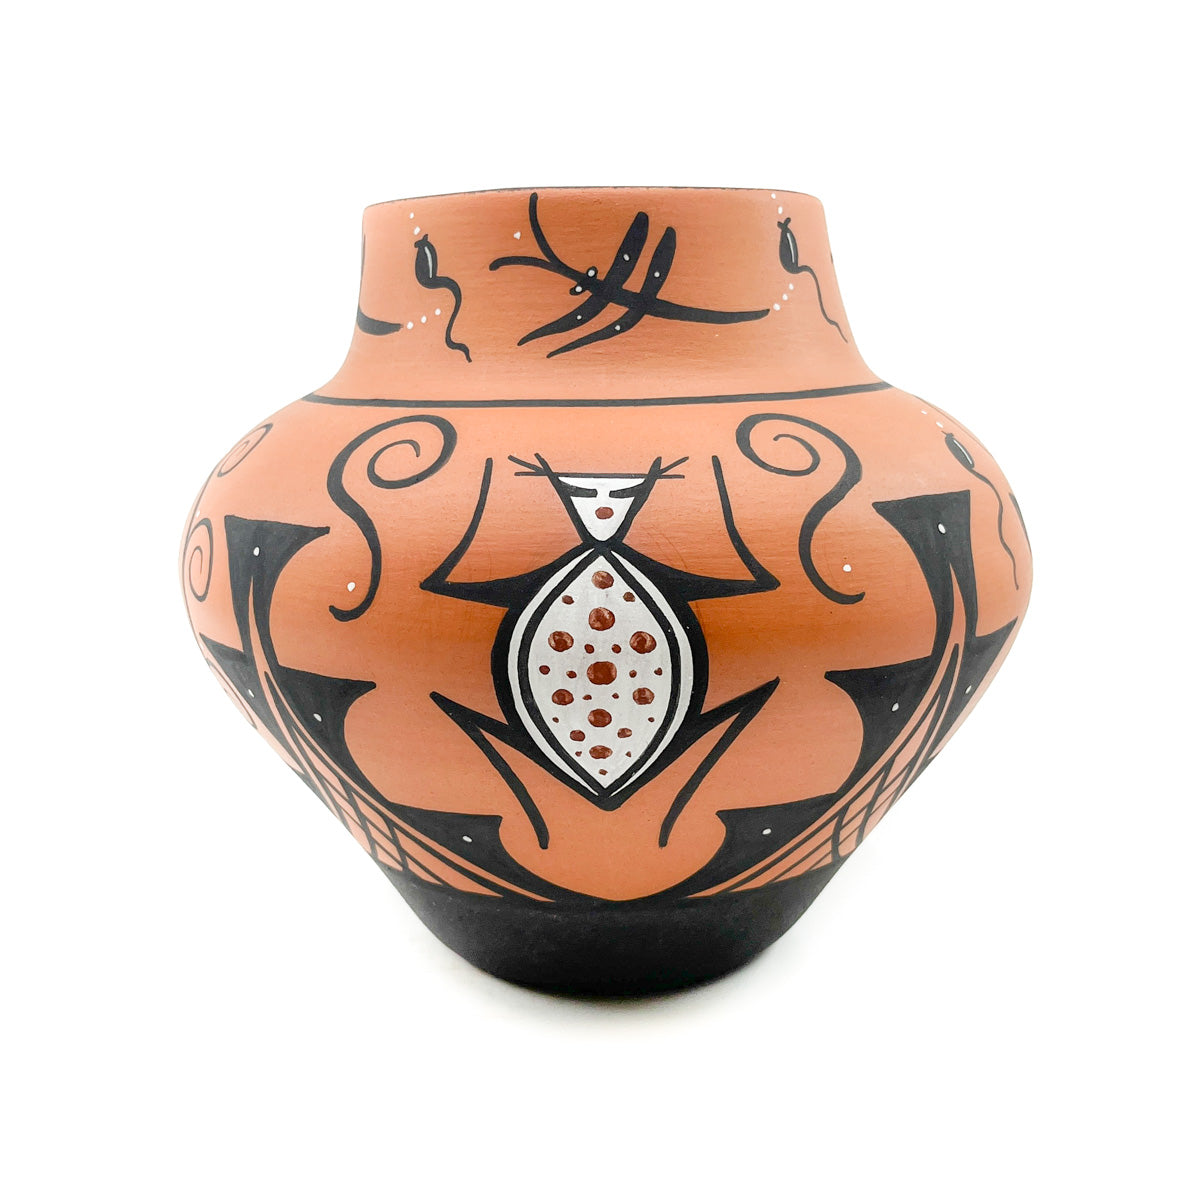 Zuni Pot with Traditional Designs